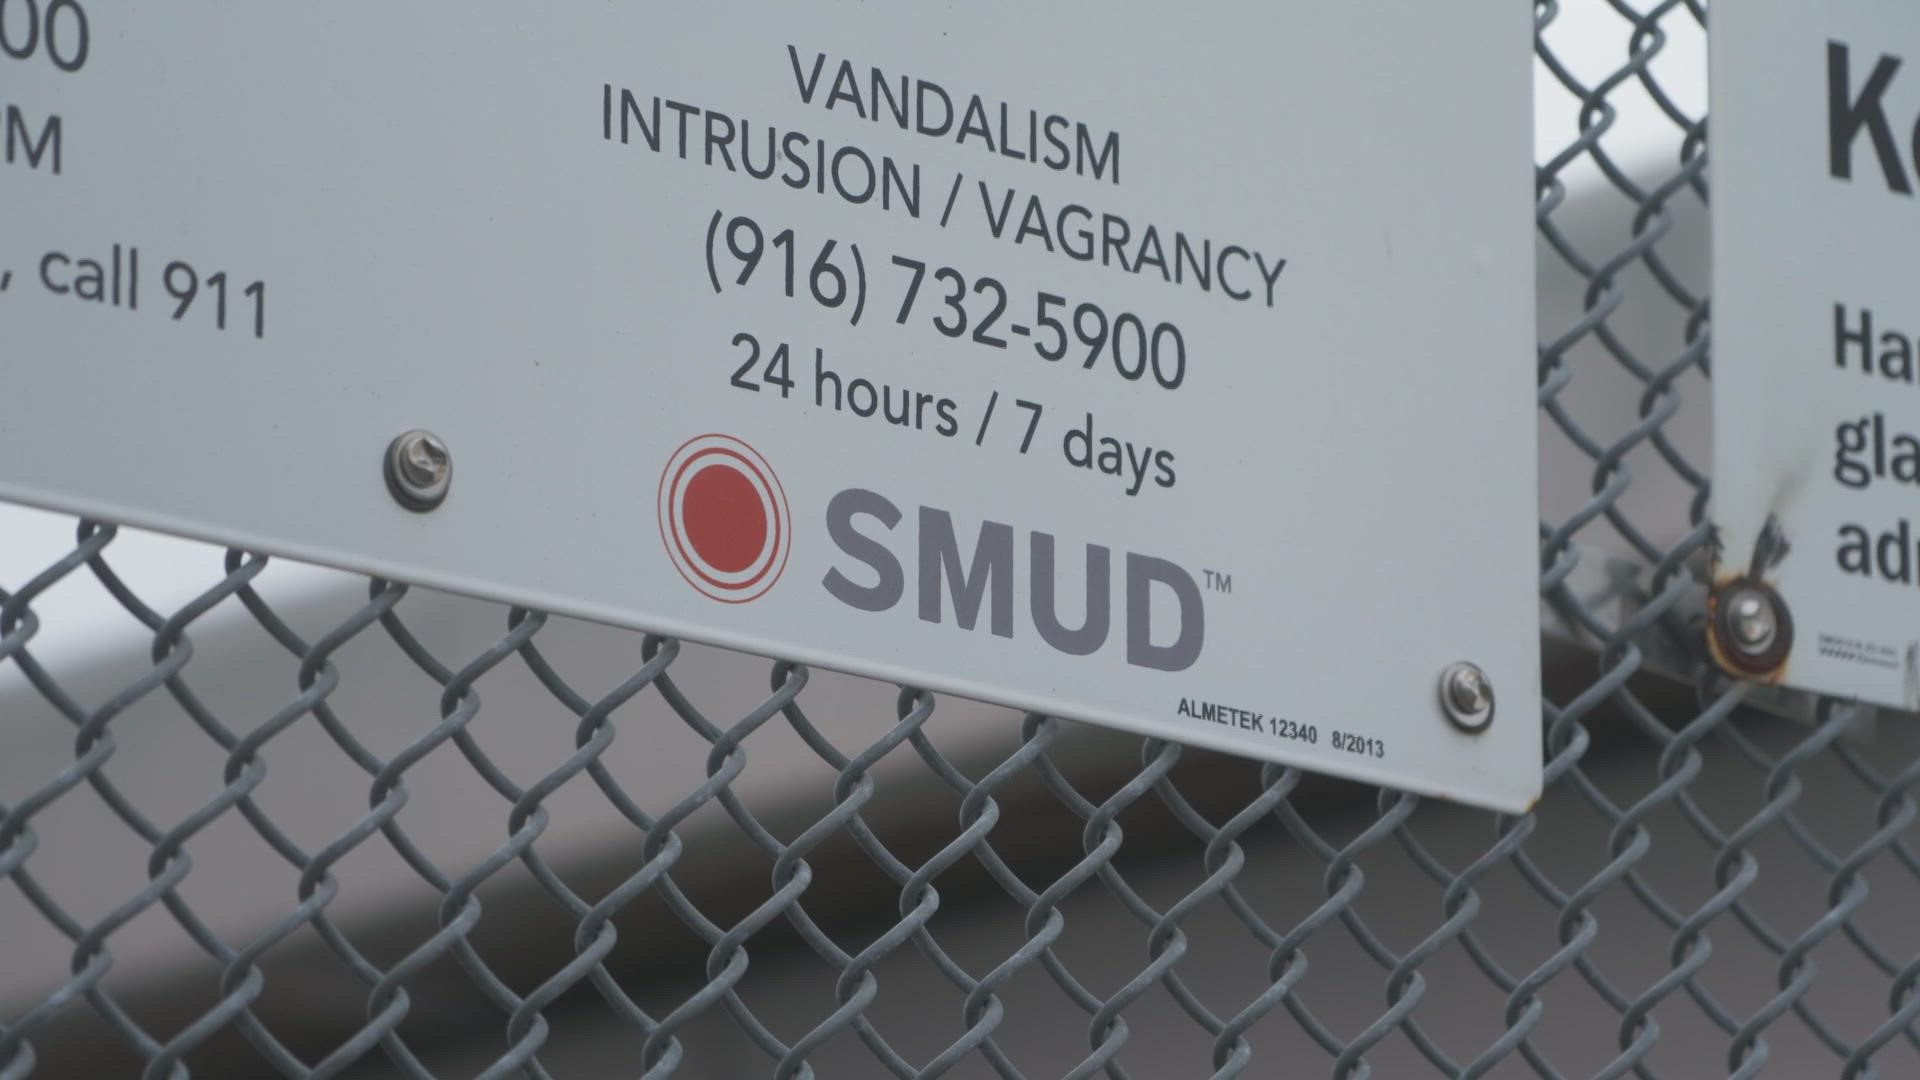 Sacramento Metropolitan Utilities District (SMUD) announced they restored power to 99% of customers by Wednesday afternoon, but broken power poles remain.